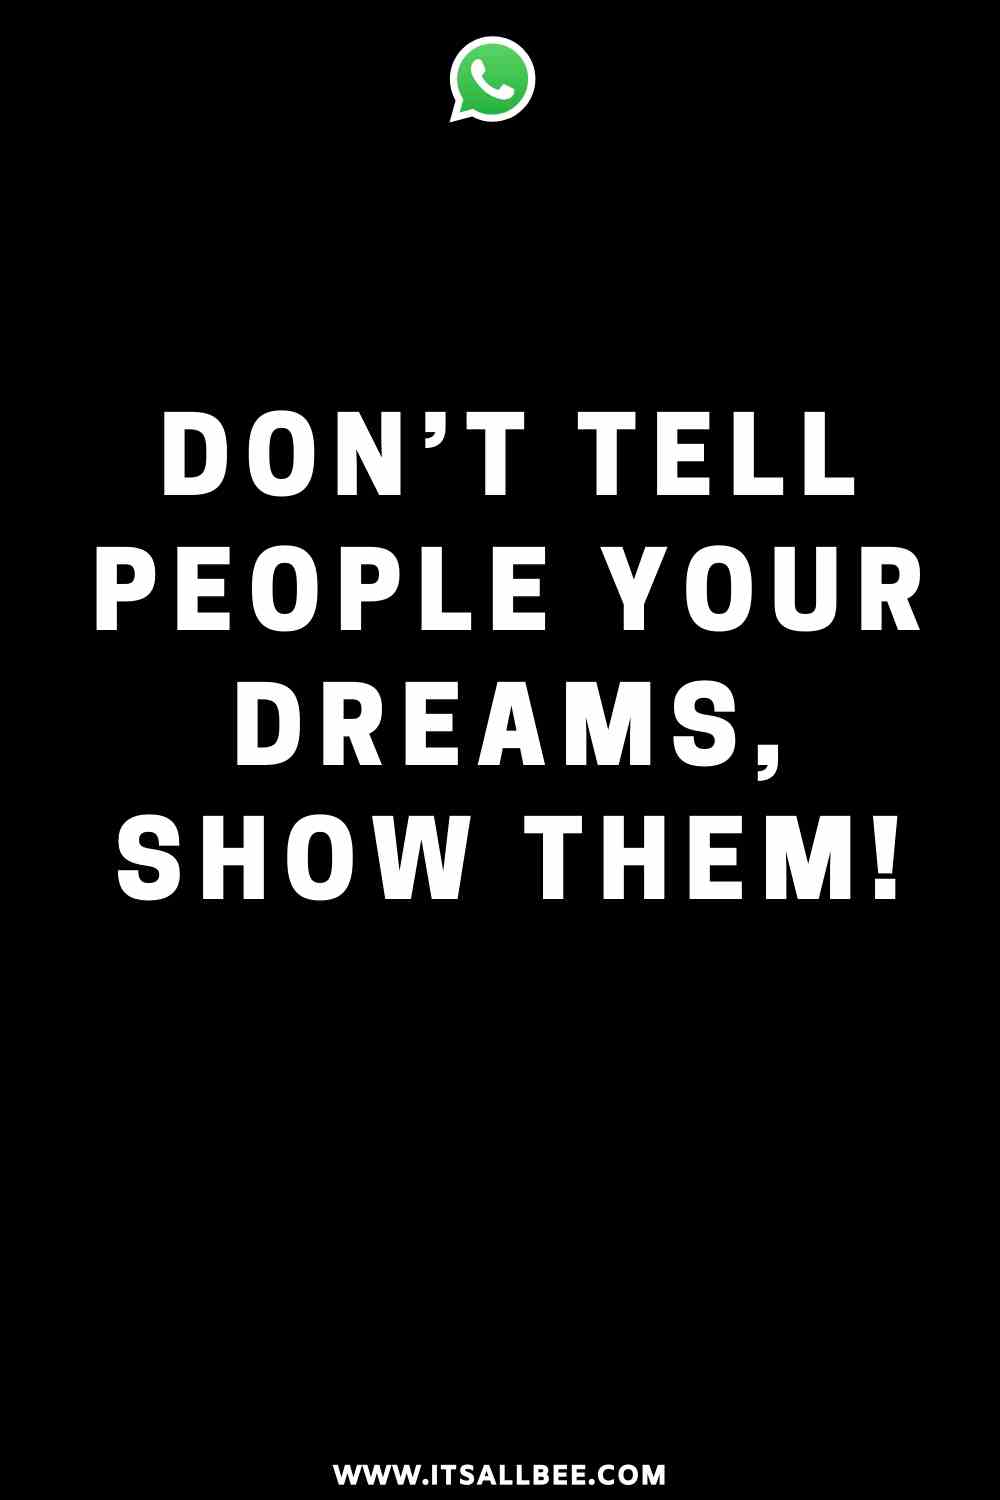 Whatsapp status - dont tell people your dreams, show them